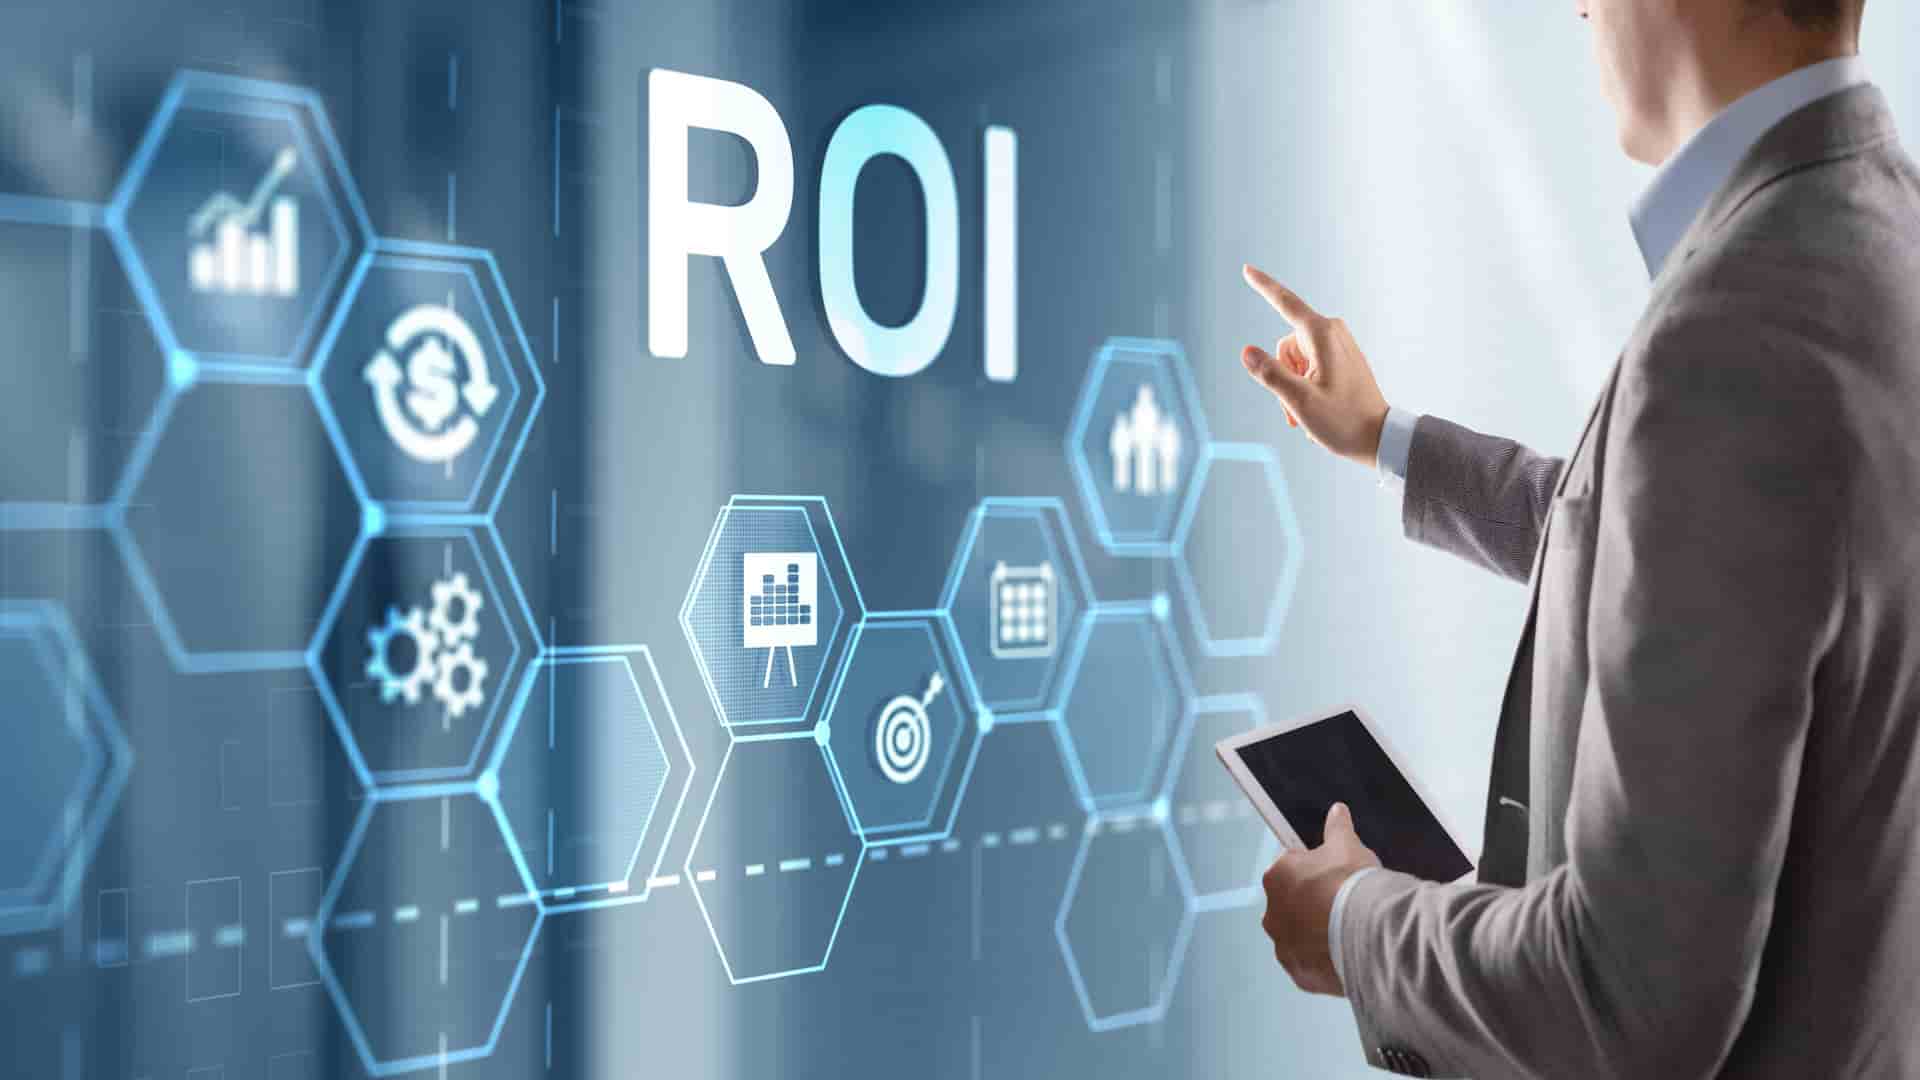 The Solution To Your Decline Of ROI